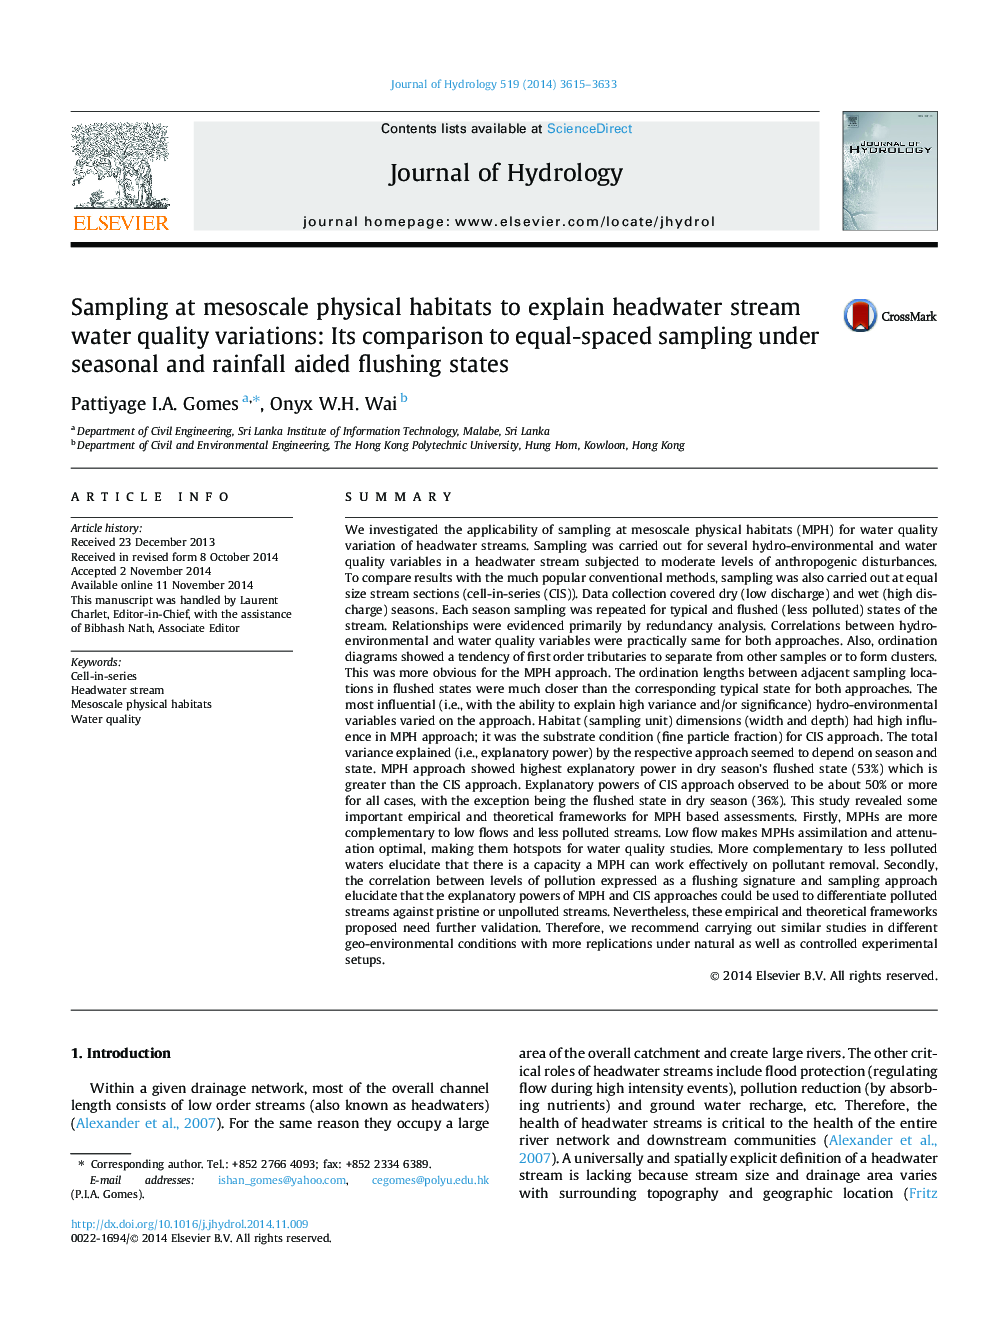 Sampling at mesoscale physical habitats to explain headwater stream water quality variations: Its comparison to equal-spaced sampling under seasonal and rainfall aided flushing states